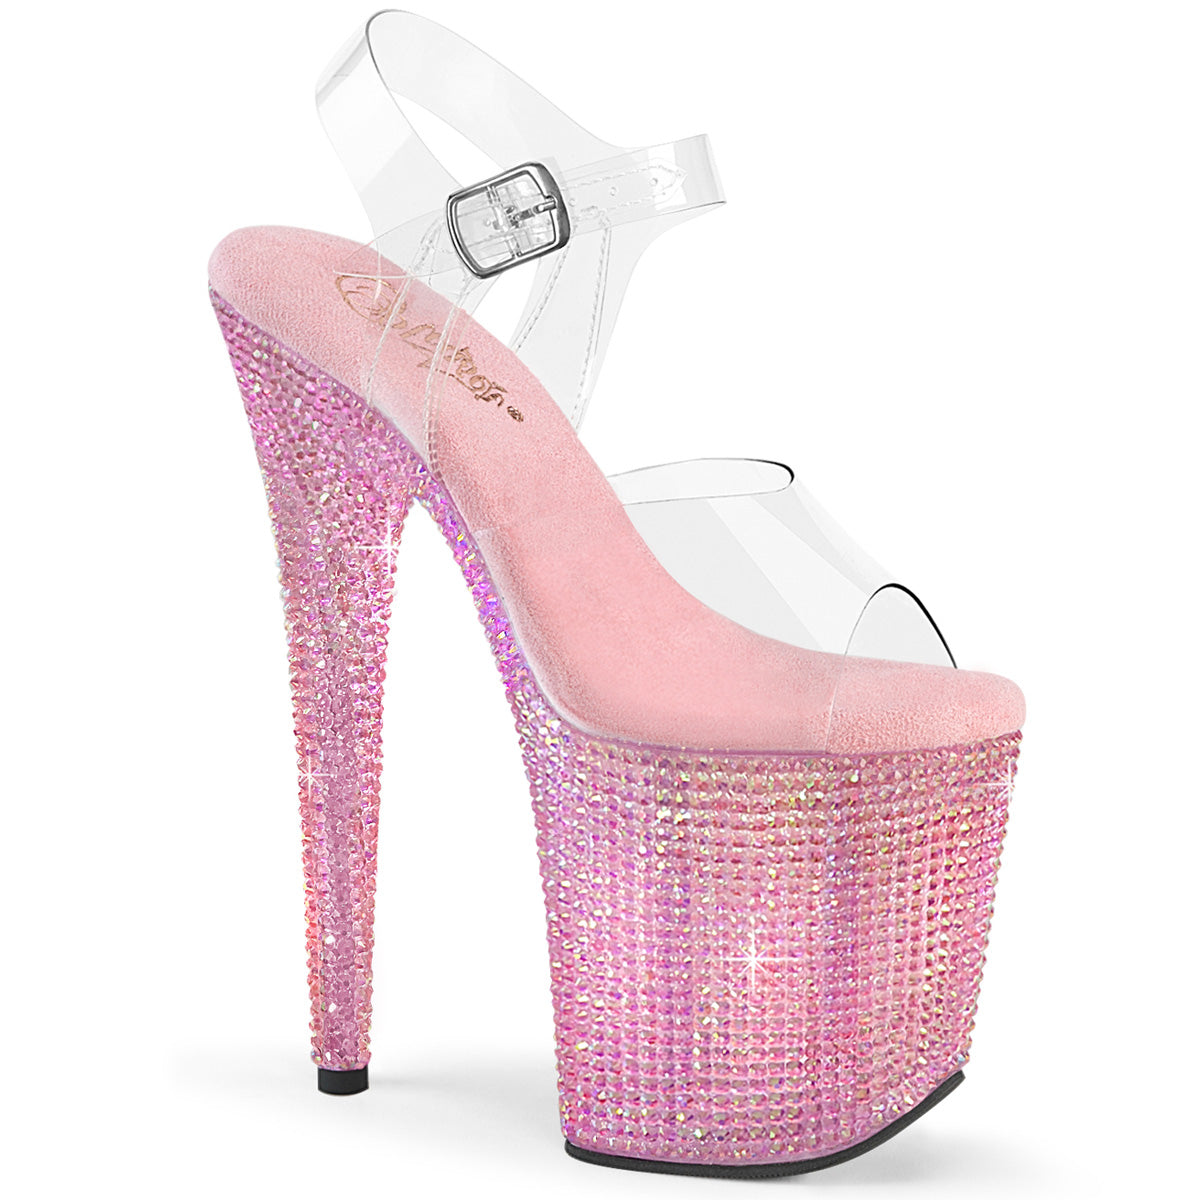 BEJEWELED-808RRS Pleaser Sexy Footwear Pole Dance Shoes